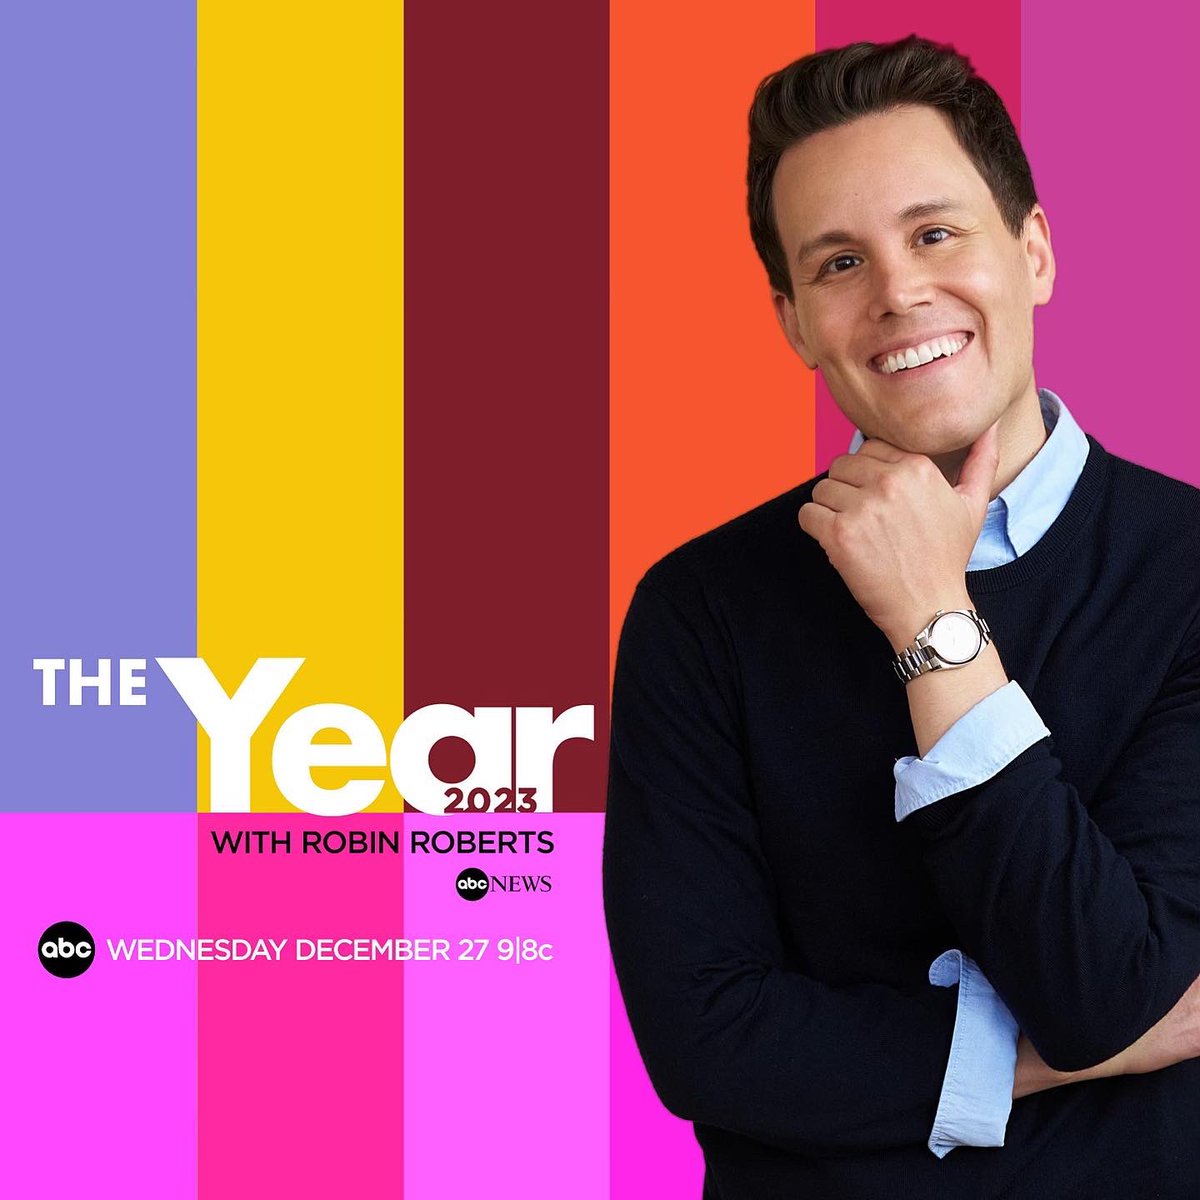 TONIGHT ON ABC! ‘The Year: 2023’ with Robin Roberts ! I’ll be recapping the year with some familiar faces, in TRULY phenomenal lighting! Join us at 9/8c on @abcnetwork , and also streaming on @hulu ! See you there! 🥂